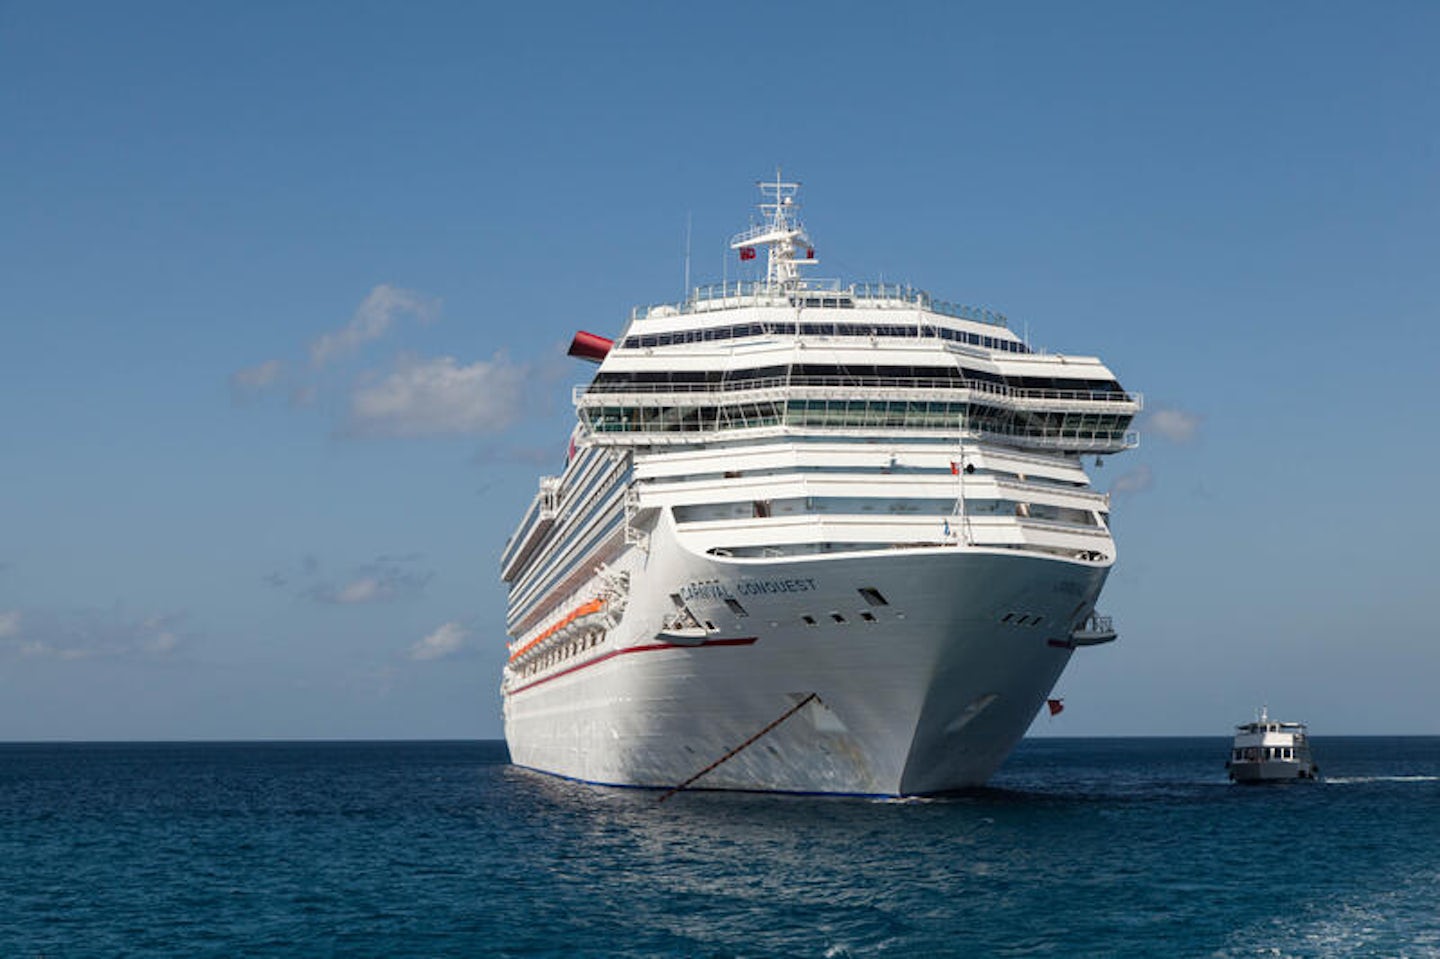 Exterior on Carnival Conquest